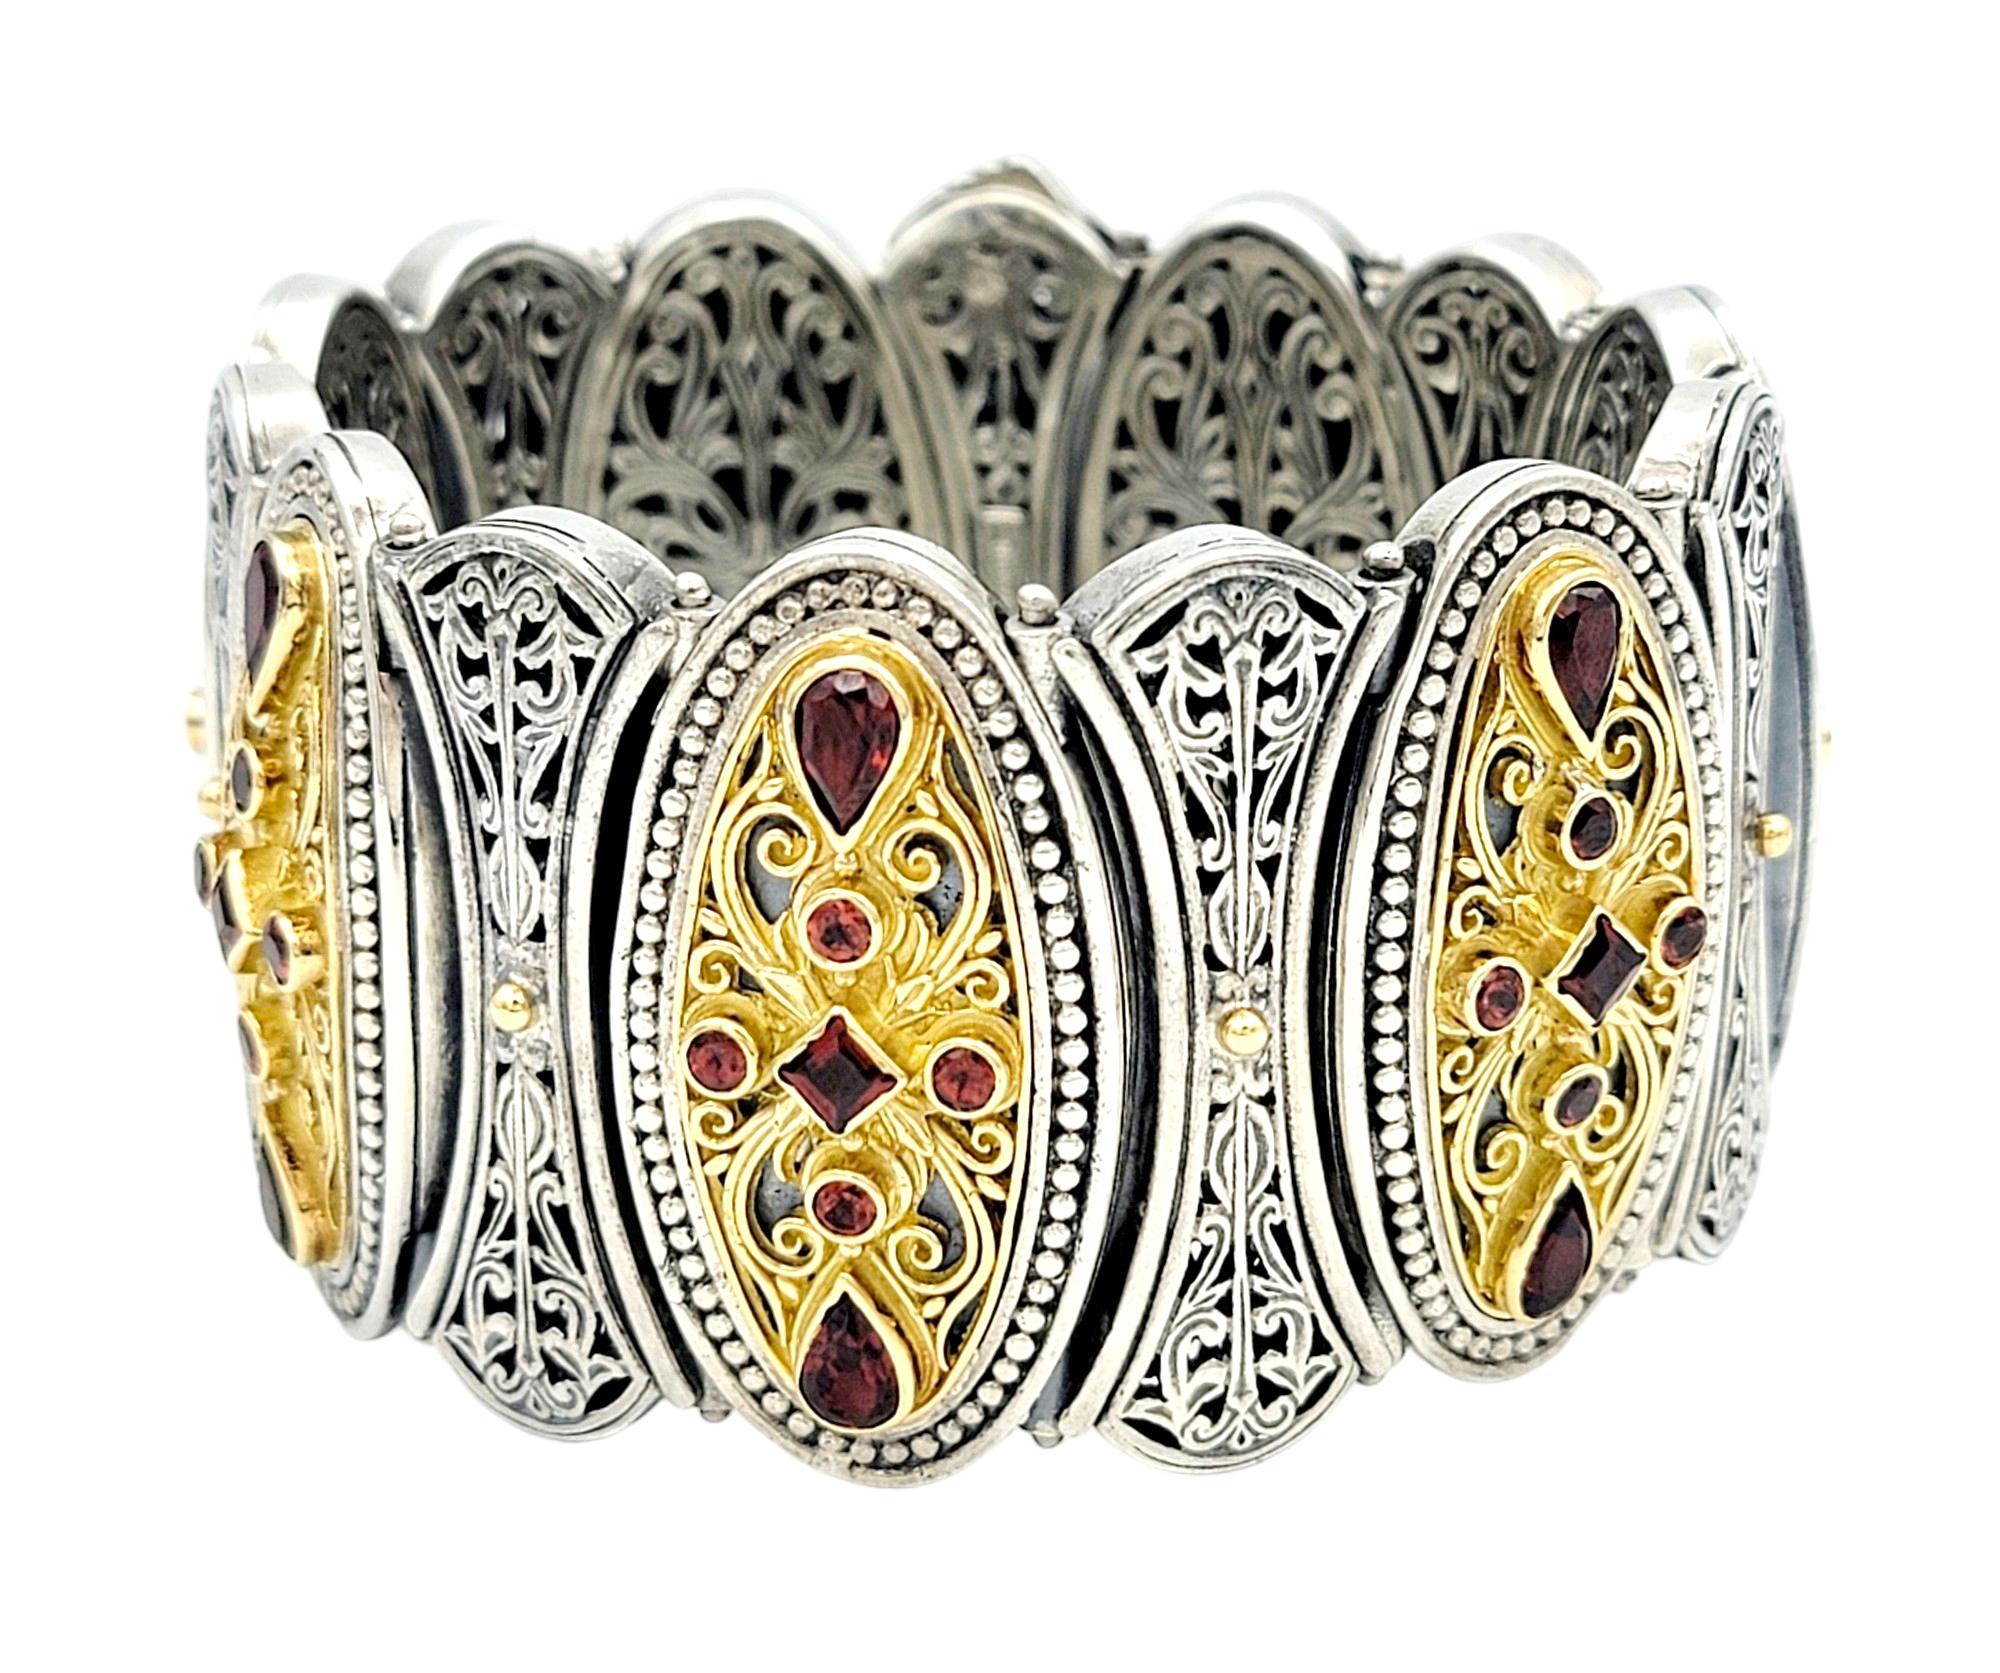 The inner circumference of this bracelet measures 6.5 inches and will comfortably fit a 5.75 - 6.25 inch wrist. 

This gorgeous Konstantino large cuff bracelet, crafted in sterling silver and adorned with 18 karat yellow gold, is a masterpiece of